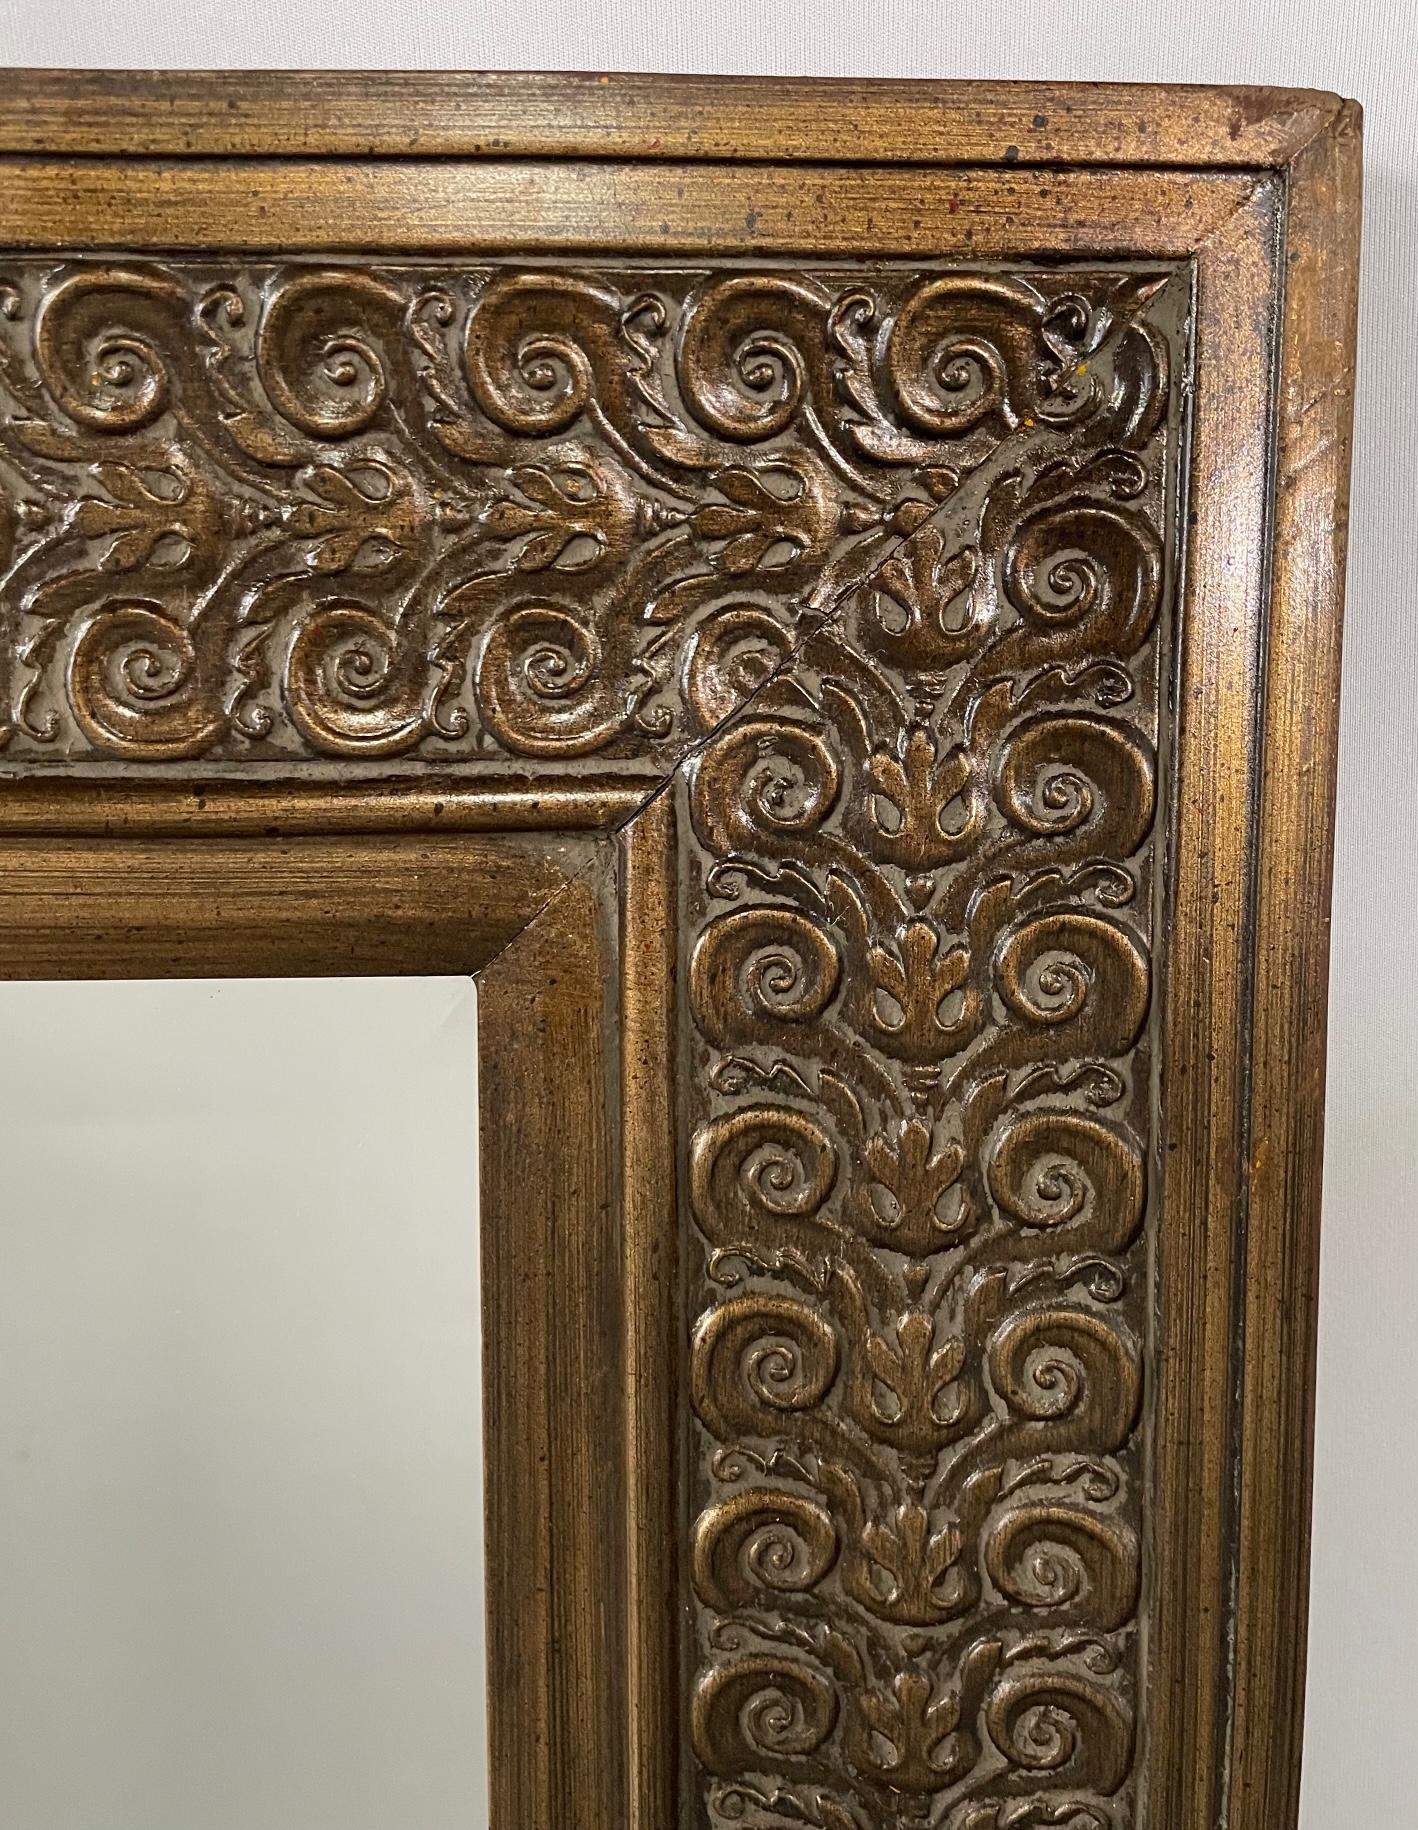 Hand-Carved French Regency Mahogany Wood Wall or Mantel Mirror